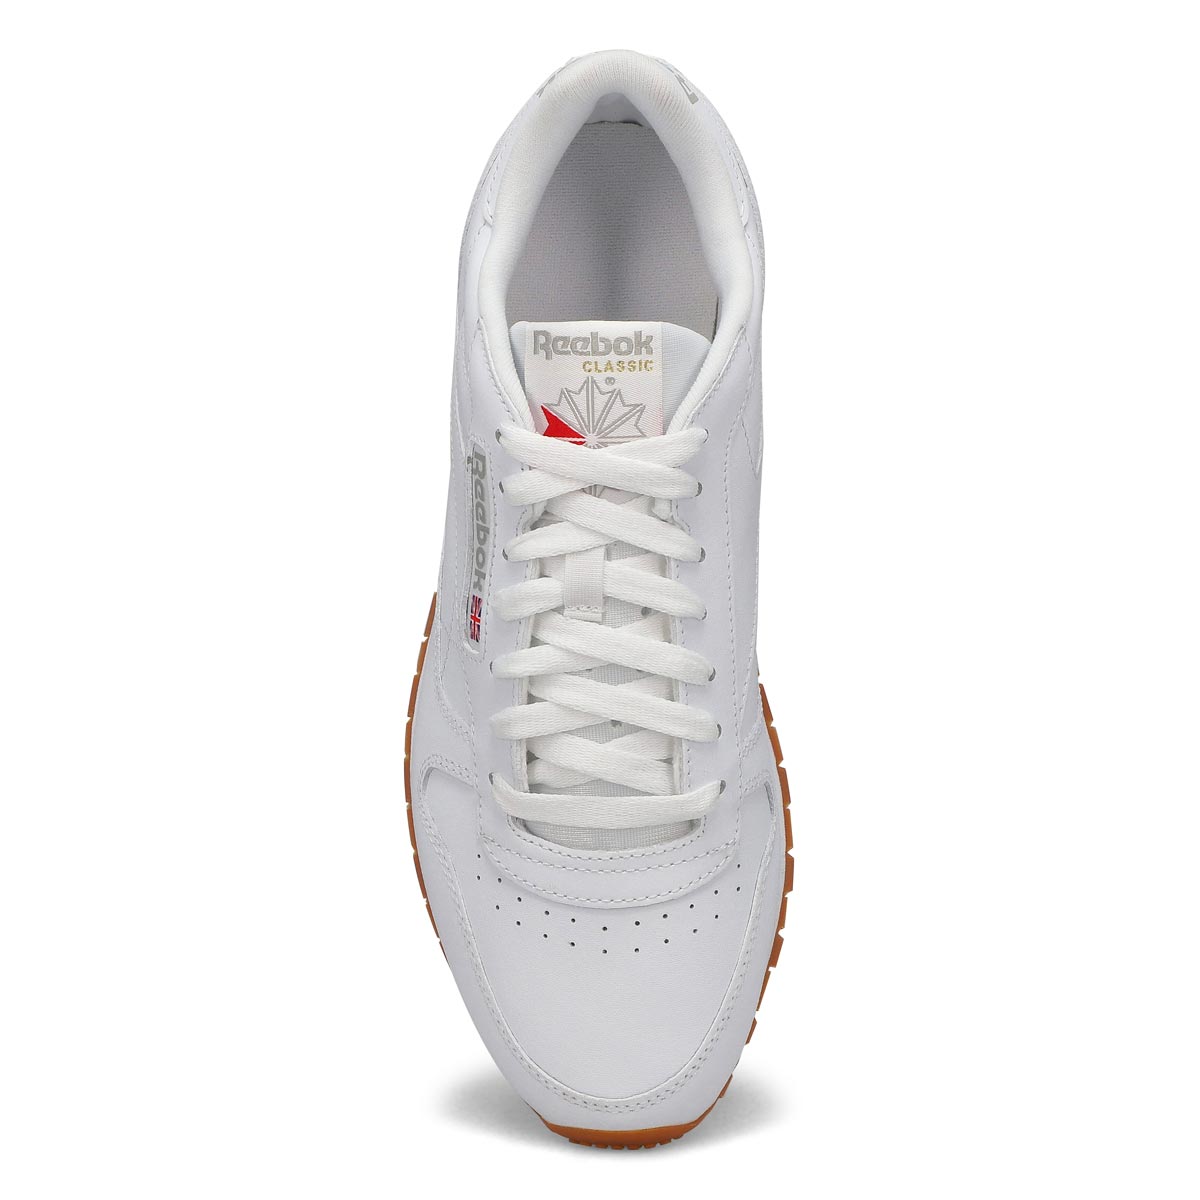 Mens Classic Leather Sneaker -White/Grey/Gum